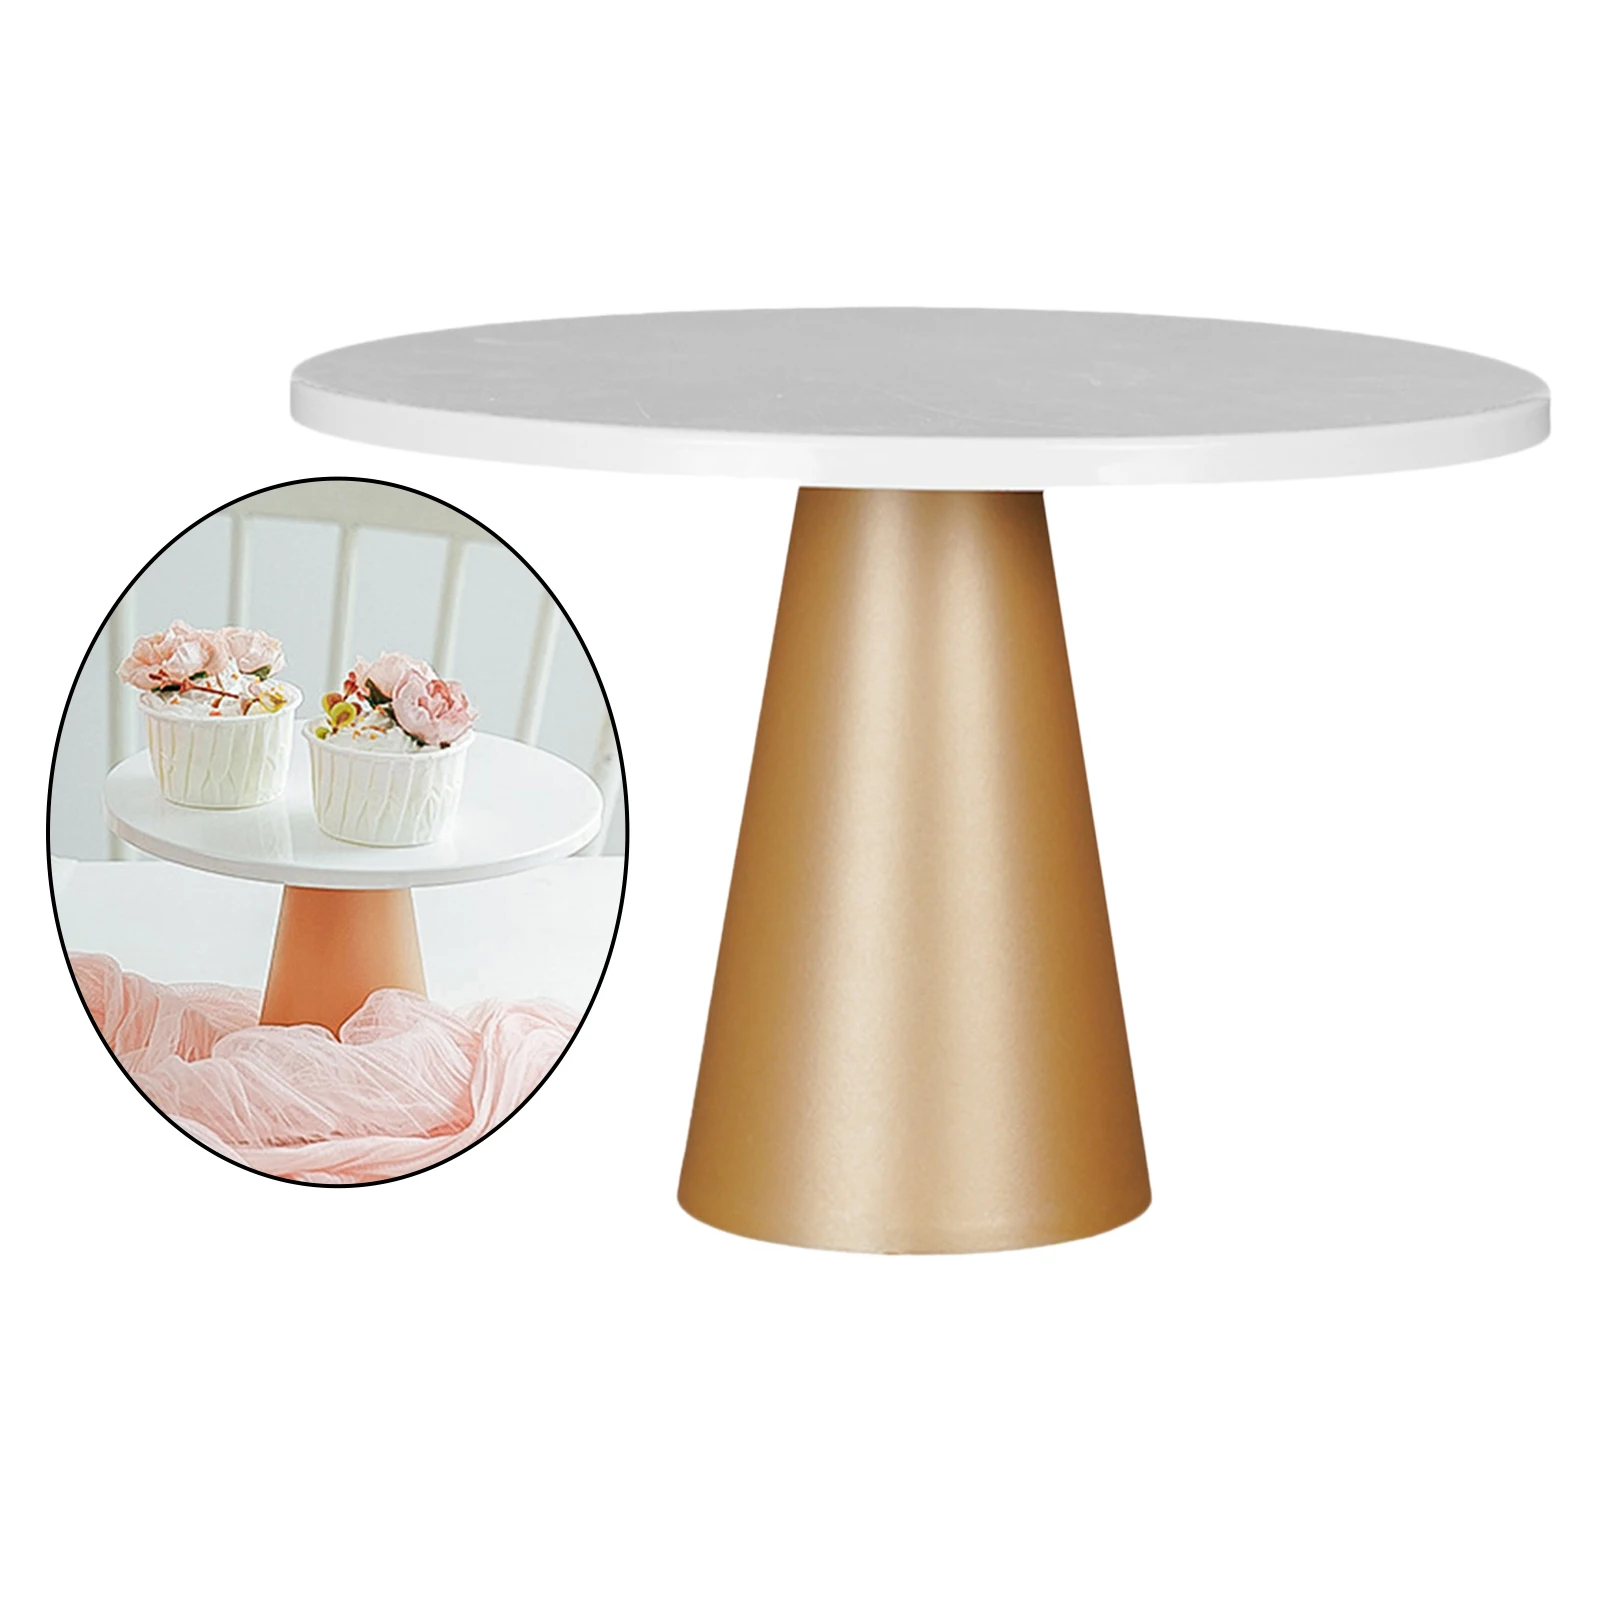 Wedding Table Cake Stands Golden Pie Plate Tray Shelf Party Kitchen Supplies